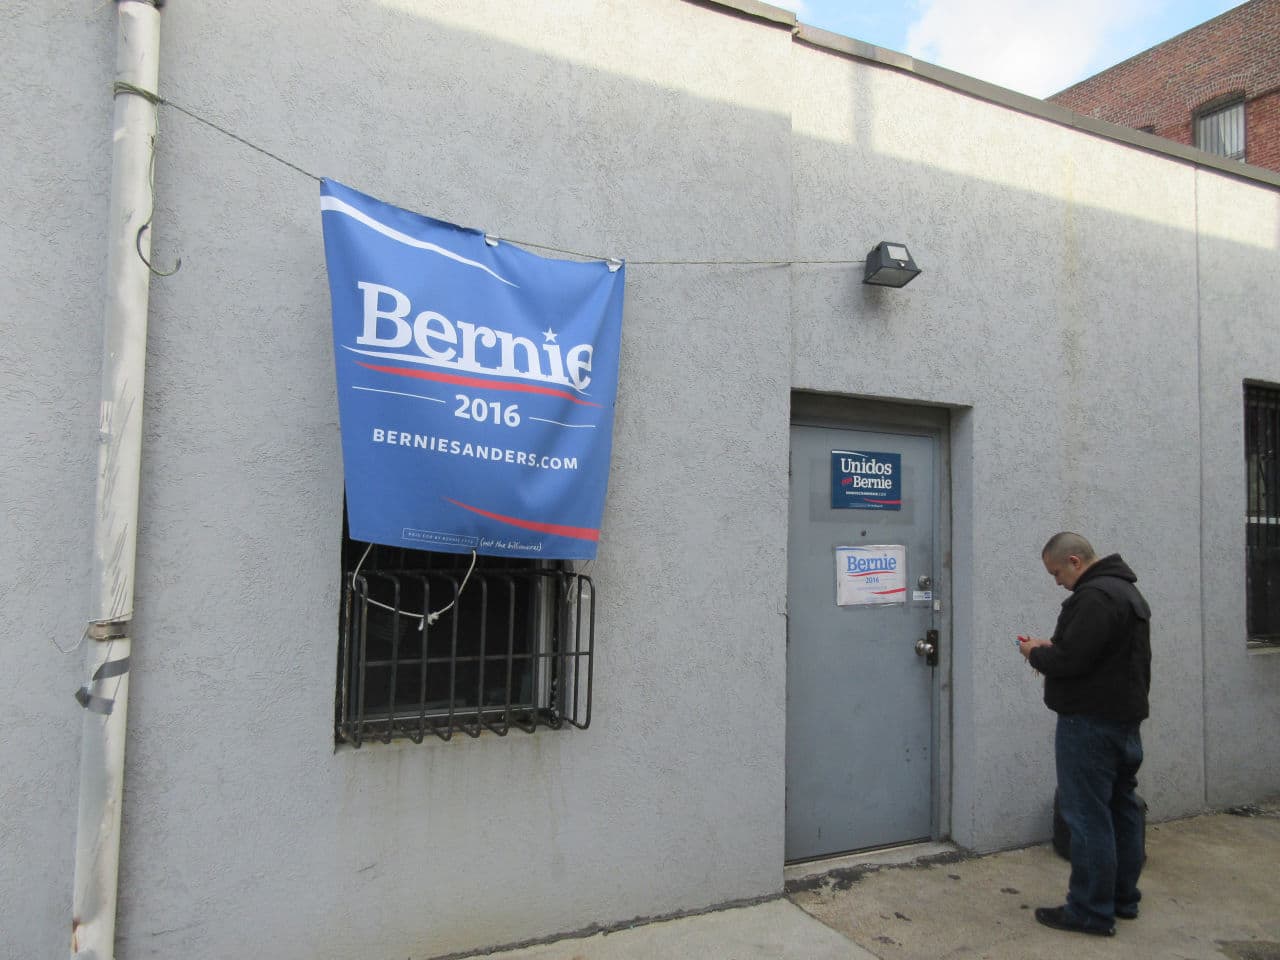 This April 8, 2016 photo shows Bernie Sanders' campaign offices in a working-class industrial neighborhood with the Gowanus Canal and a toxic waste site nearby in the Brooklyn borough of New York. (Beth Harpaz/AP)